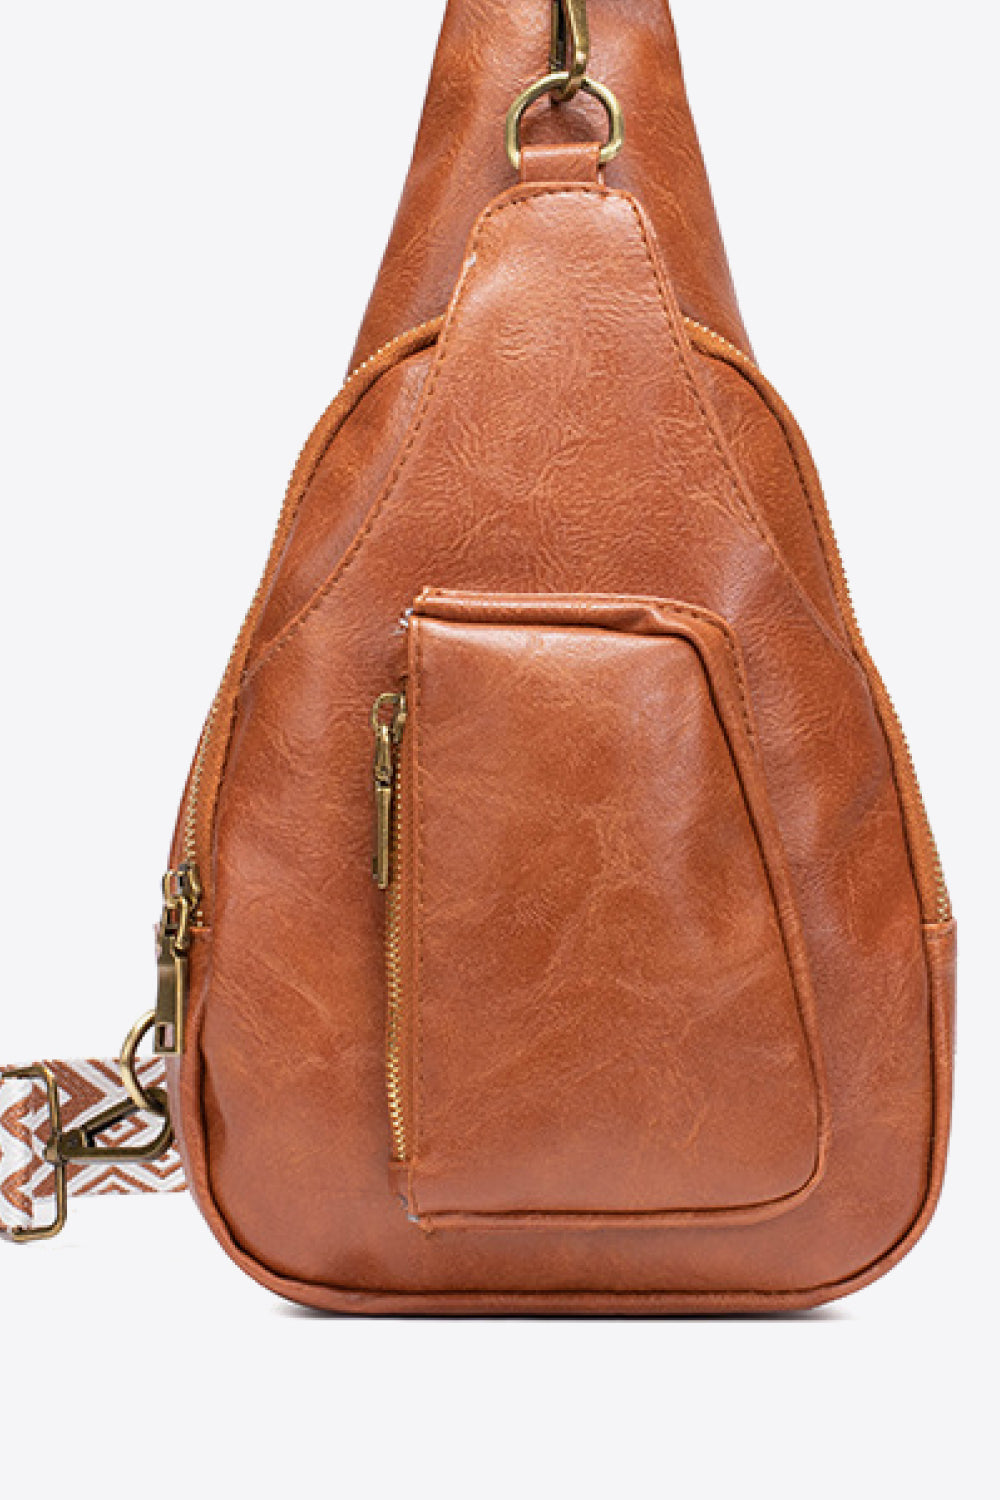 All The Feels PU Leather Sling Bag